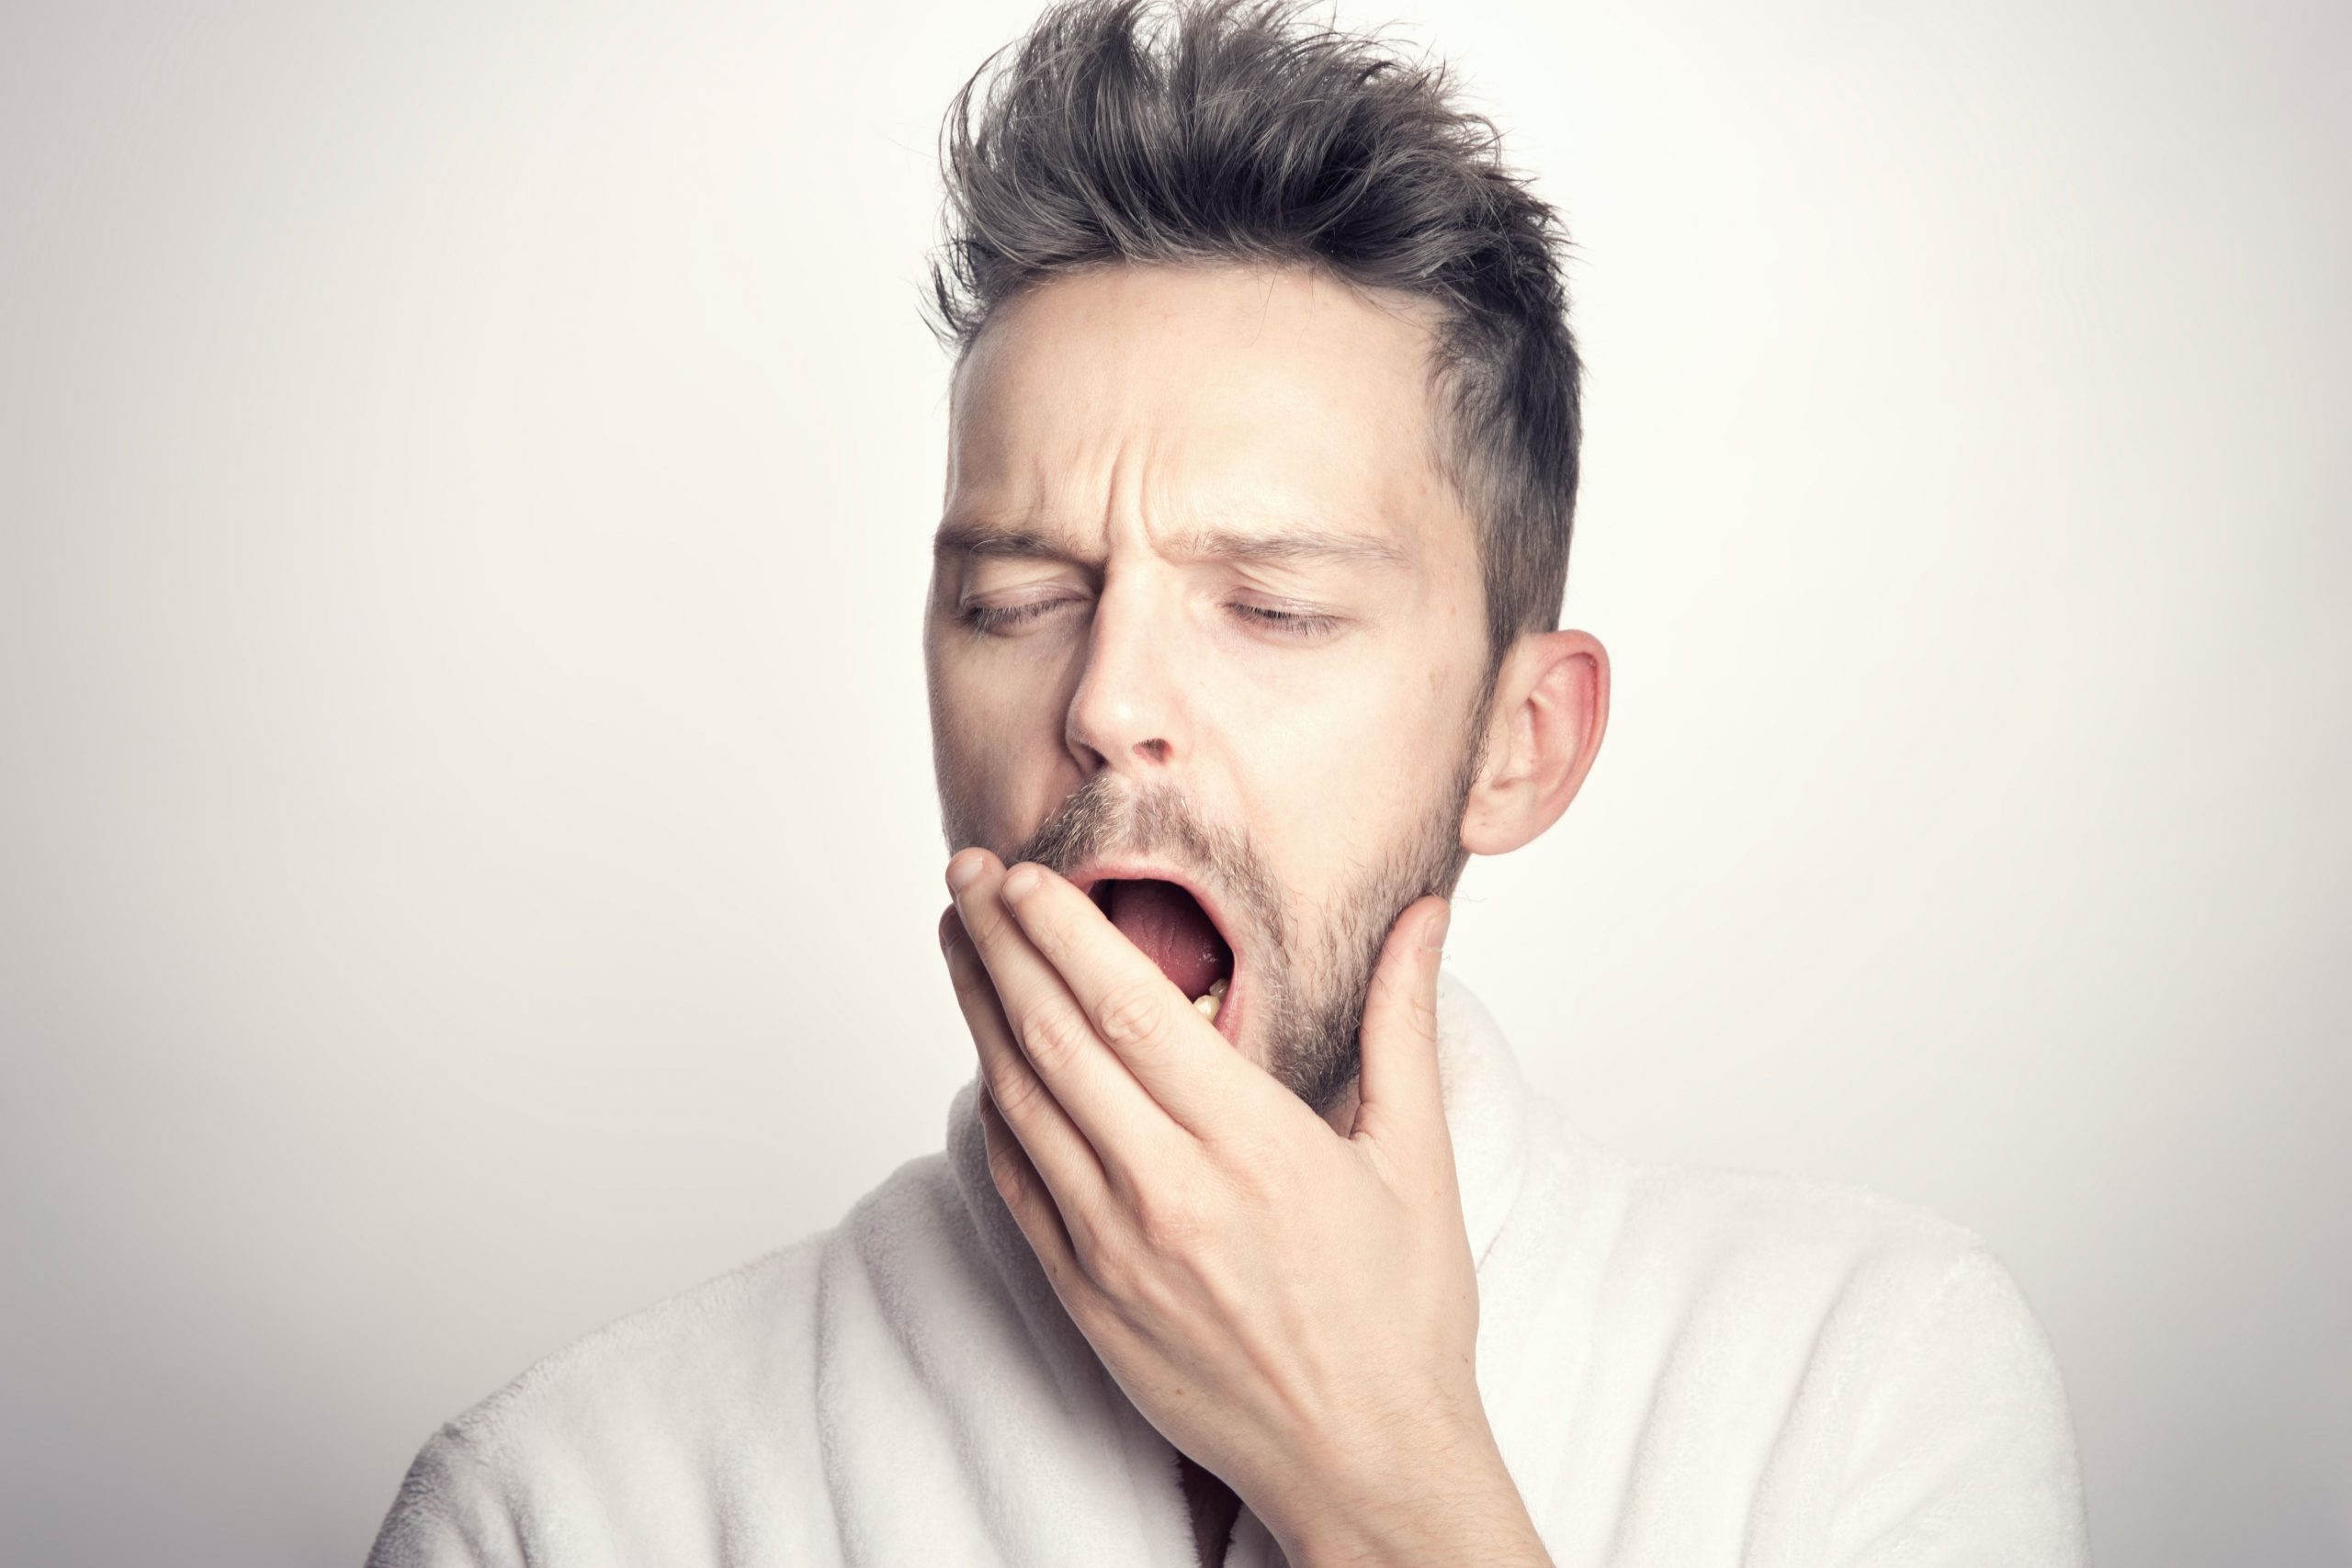 Are yawns really contagious?